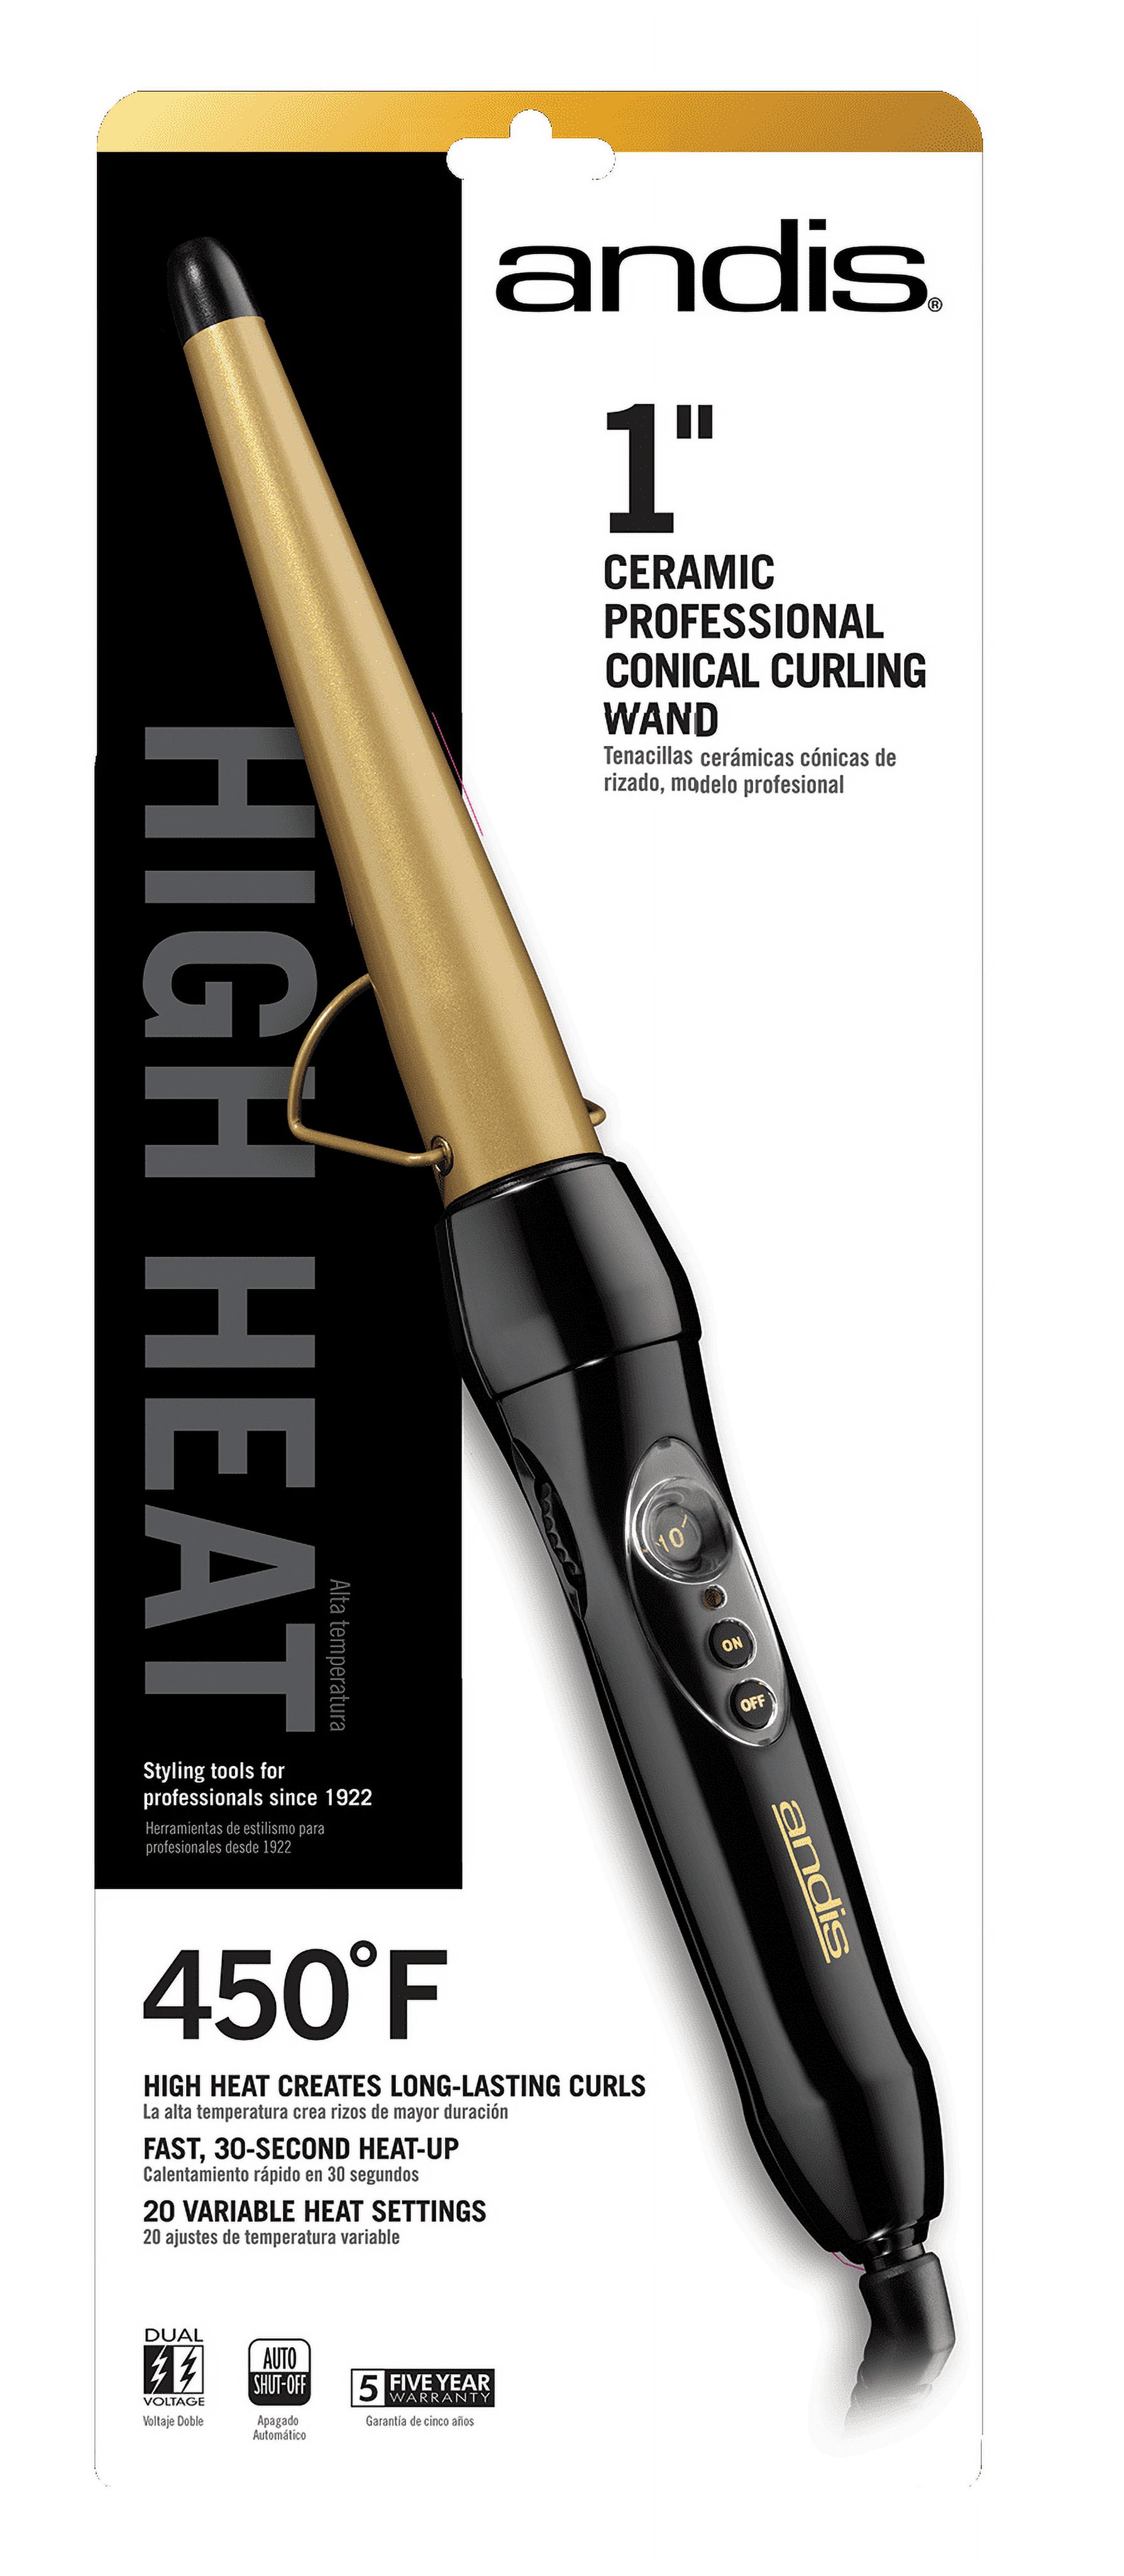 Andis High Heat Gold Ceramic Conical Curling Wand, 1-Inch - image 3 of 4